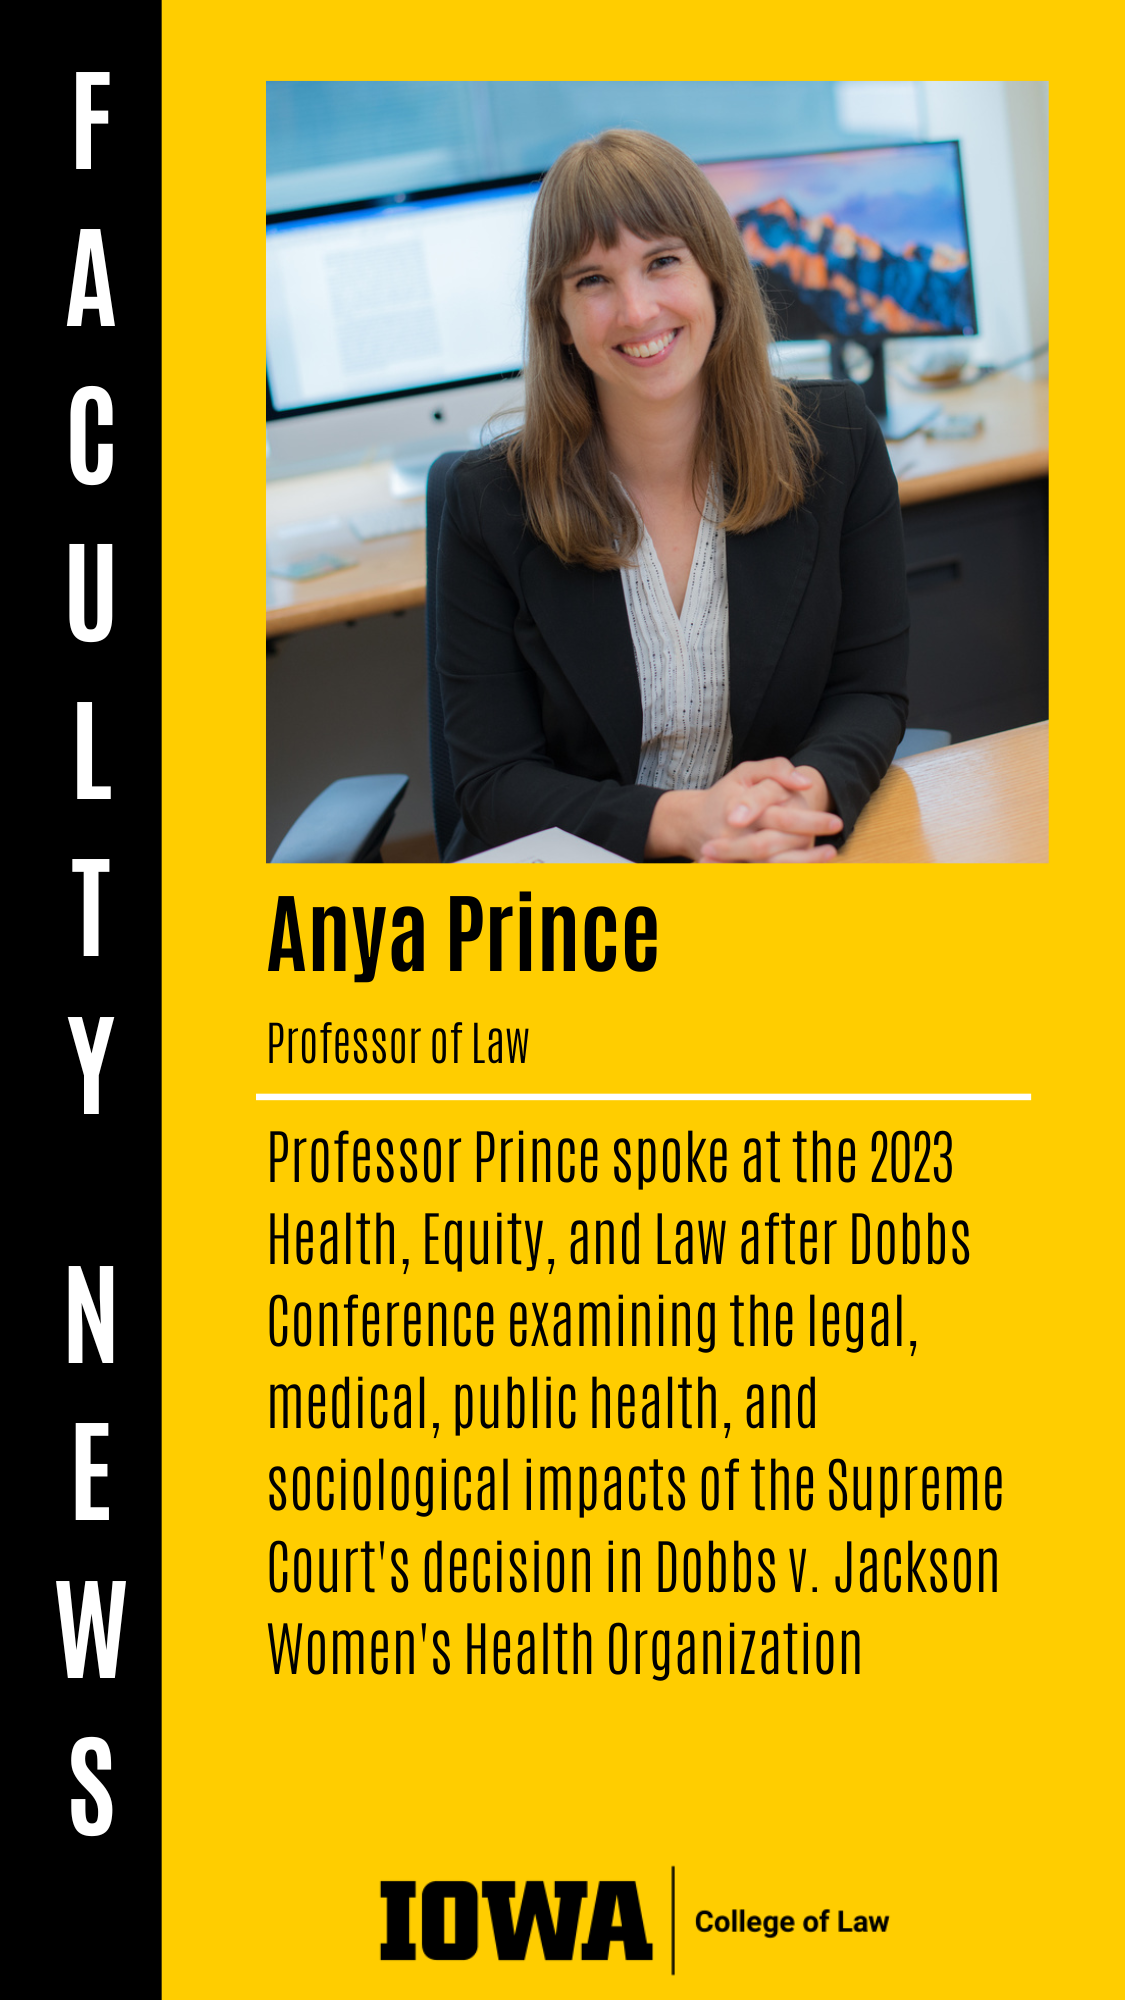 Professor of Law Professor Prince spoke at the 2023 Health, Equity, and Law after Dobbs Conference examining the legal, medical, public health, and sociological impacts of the Supreme Court's decision in Dobbs v. Jackson Women's Health Organization Anya Prince